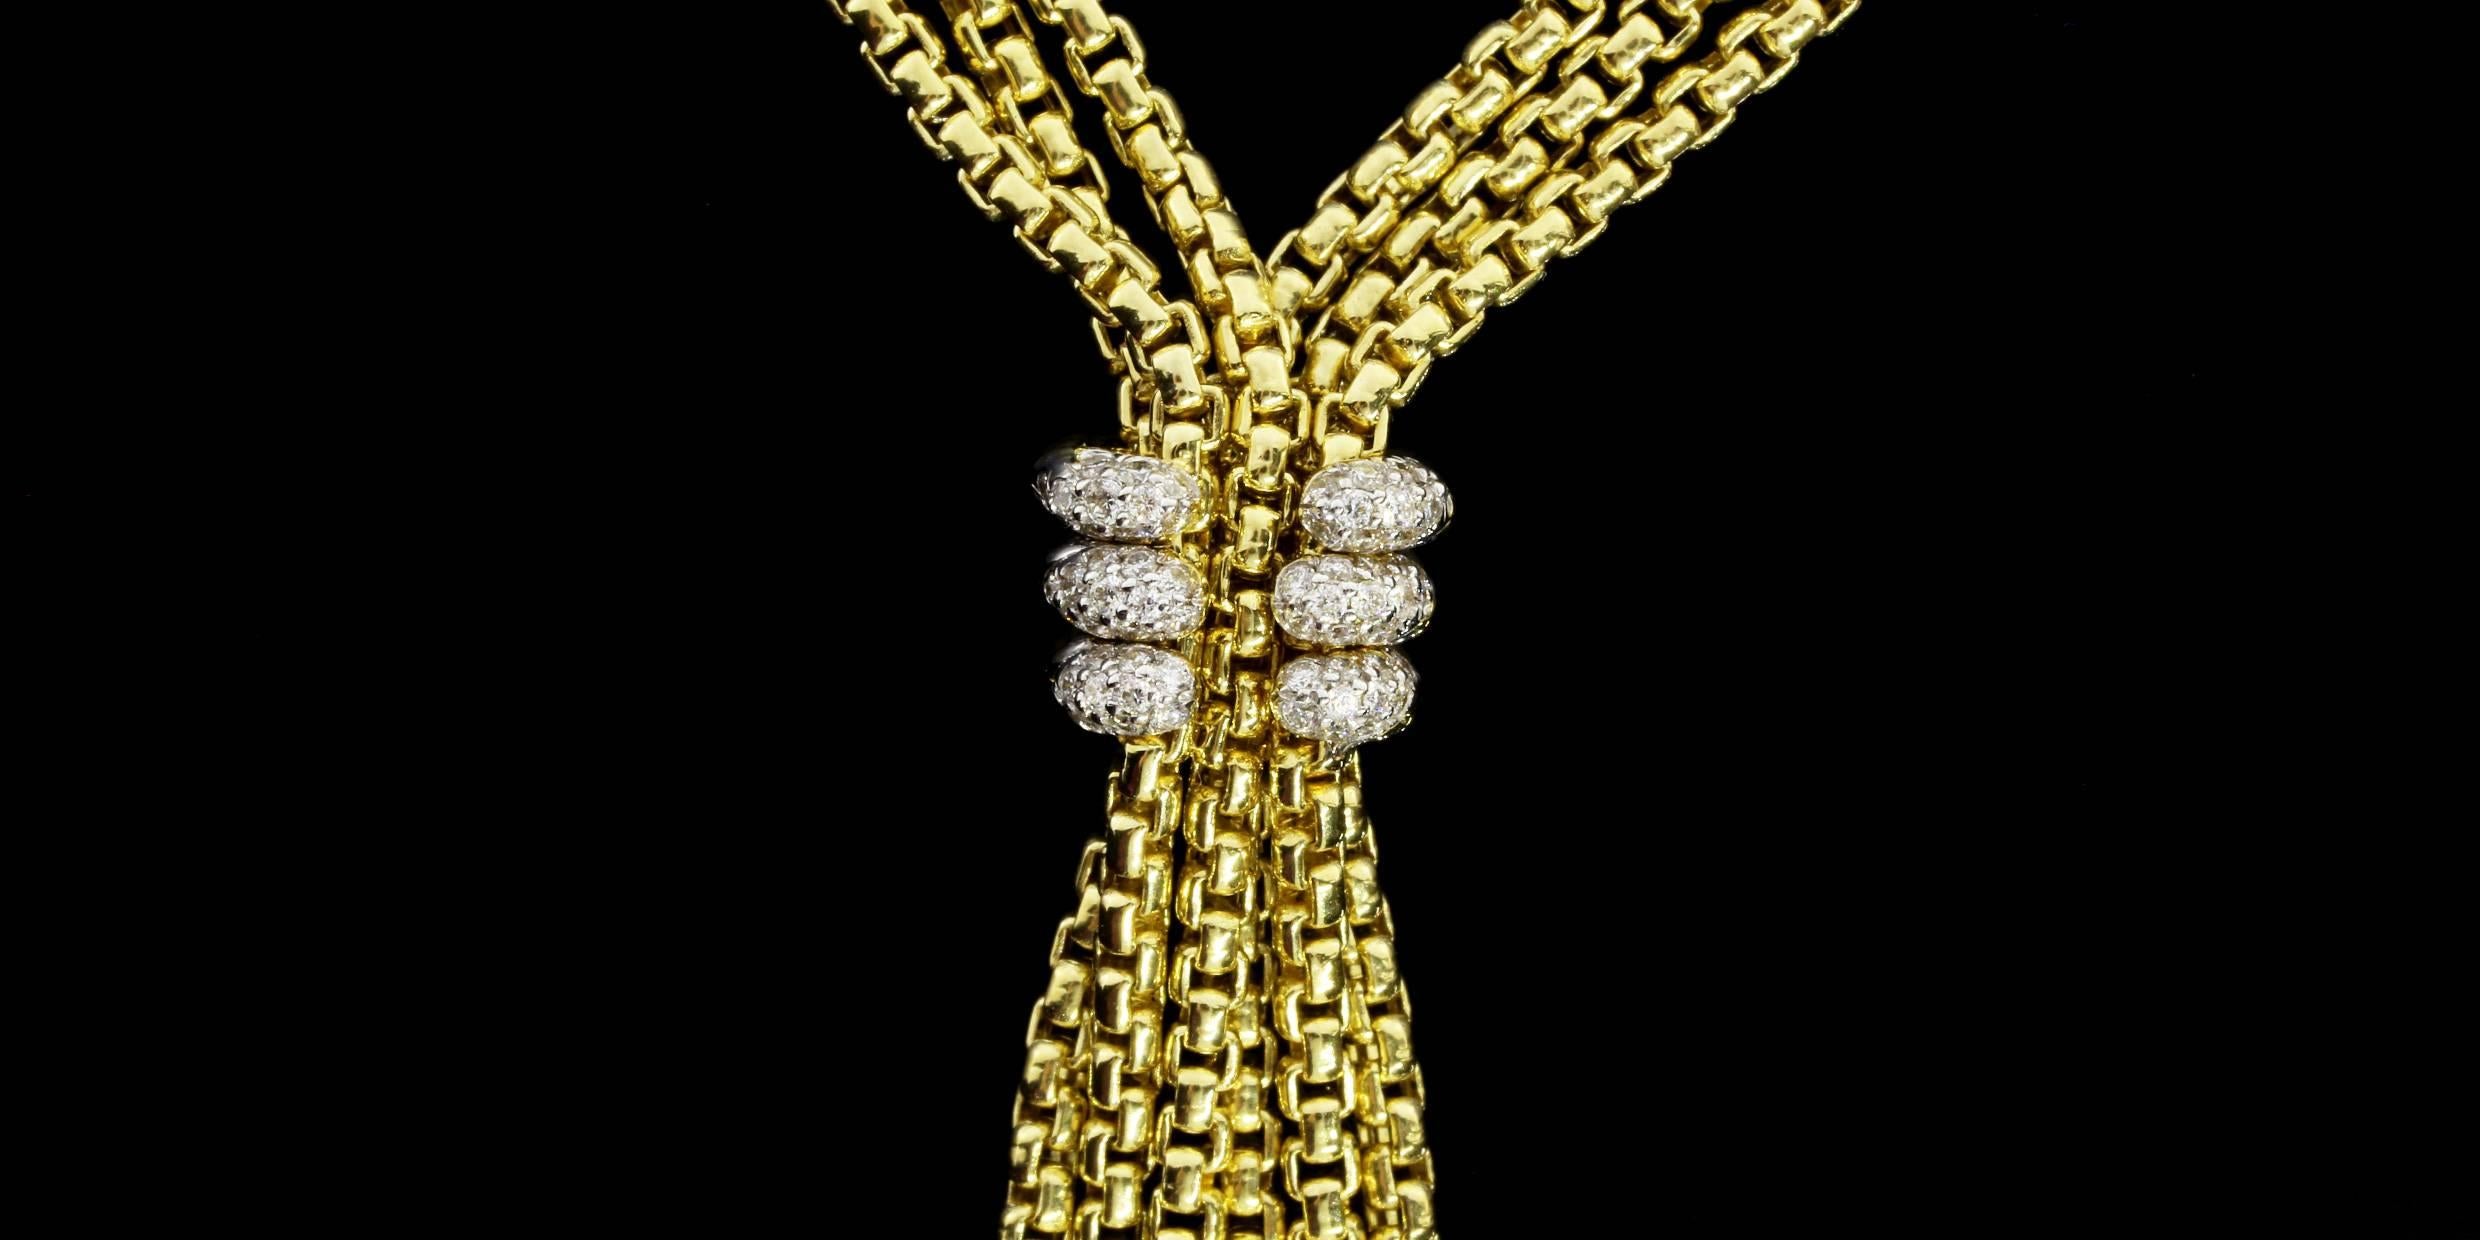 This is a beautiful statement necklace from David Yurman in classic 18 karat yellow gold. It features 3 strands of yellow gold box chain that come together in the center to form a tassel with a pave diamond station & pendulum like ends. The necklace